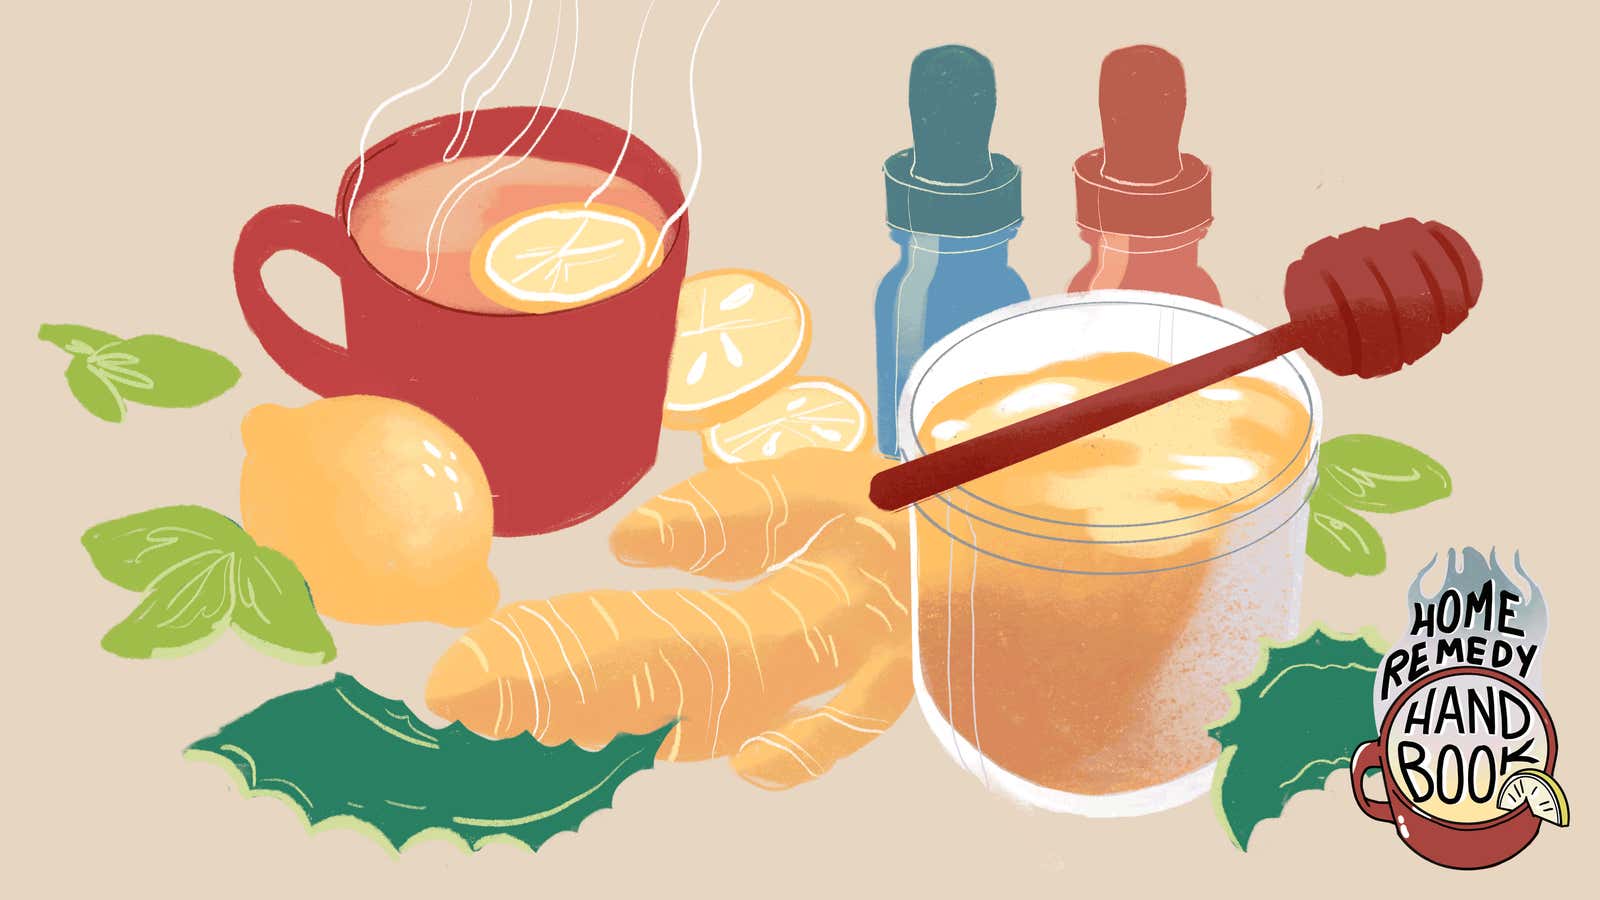 Your Complete Guide to Home Remedies: Safe, Dangerous, Fake, and Everything in Between